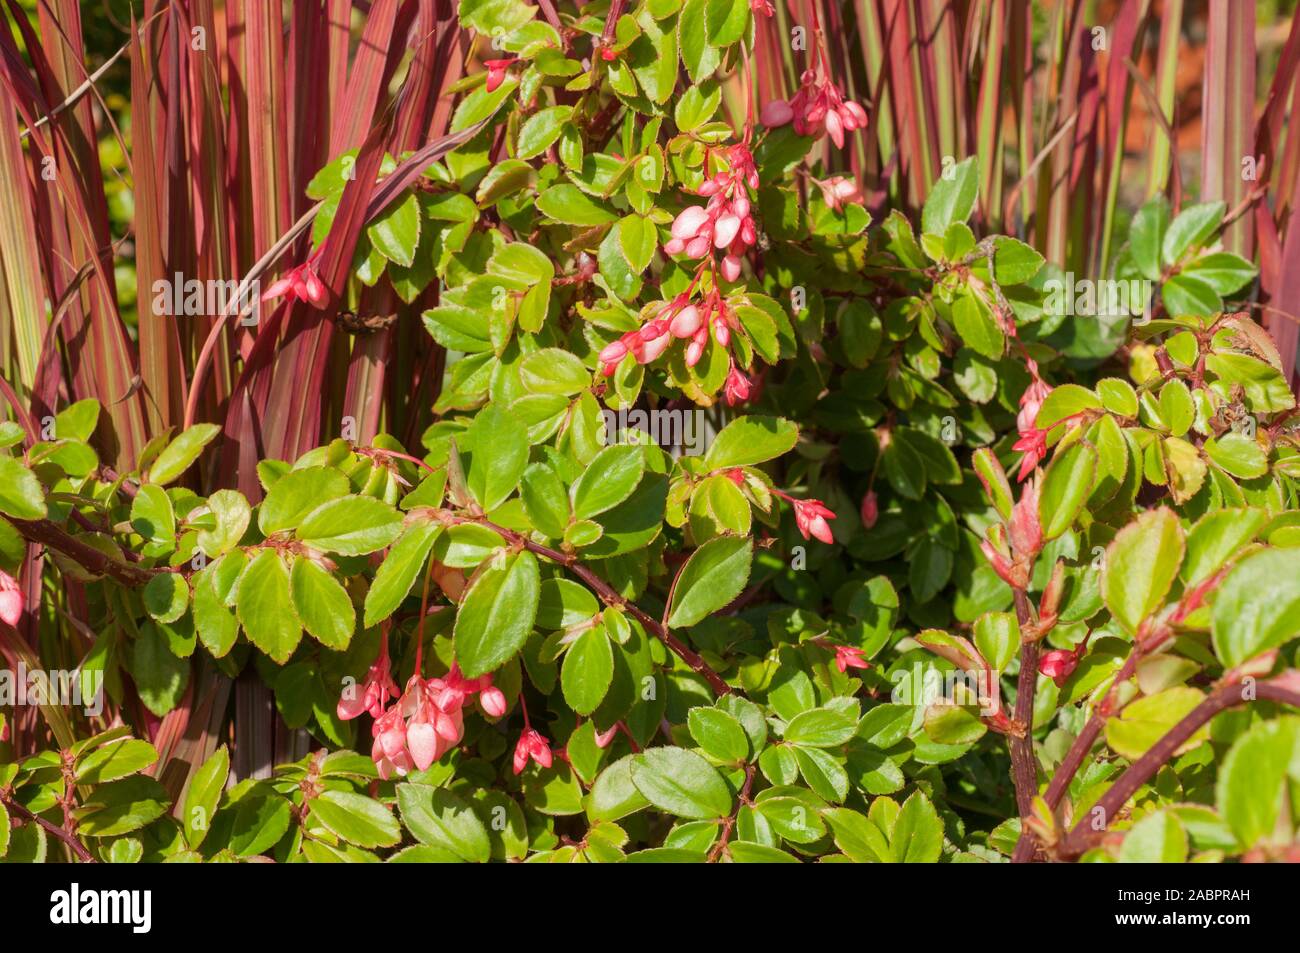 Begonia fuchsioides also called Fuchsia Begonia are a summer flowering Begonia with small pink flowers. Best grown indoors at 15-20o C . Stock Photo